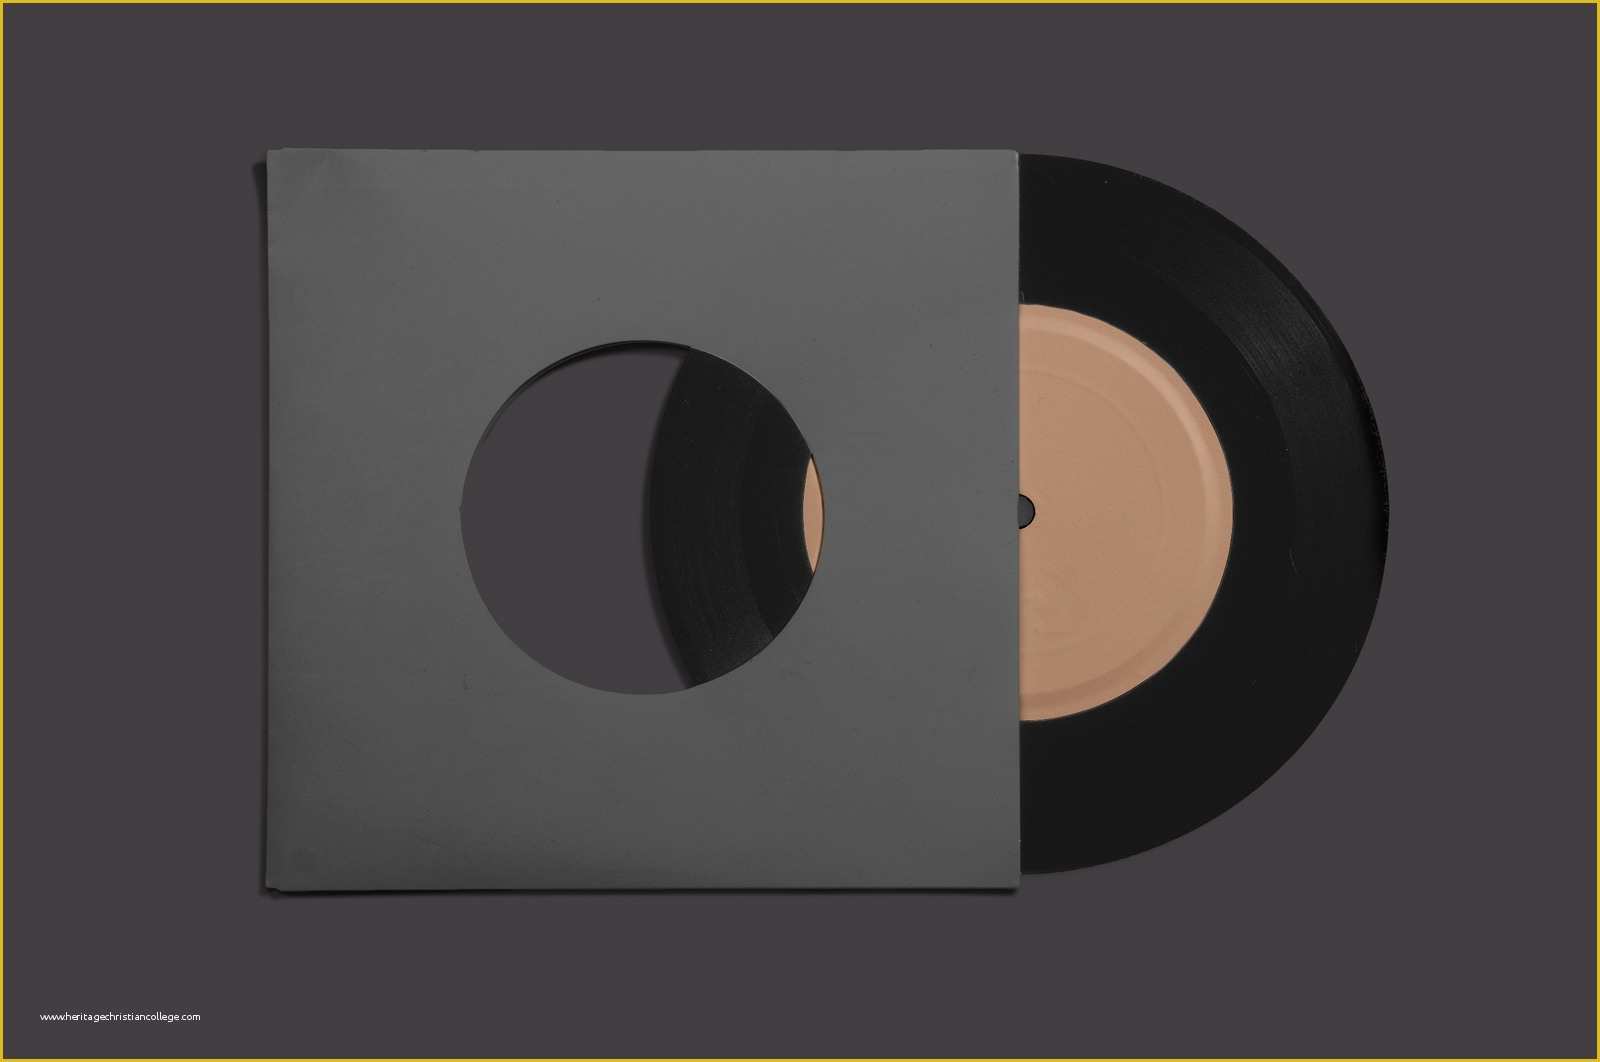 Free Vinyl Record Template Of the Vinyl Record Mockup Templates Get An Upgrade Go